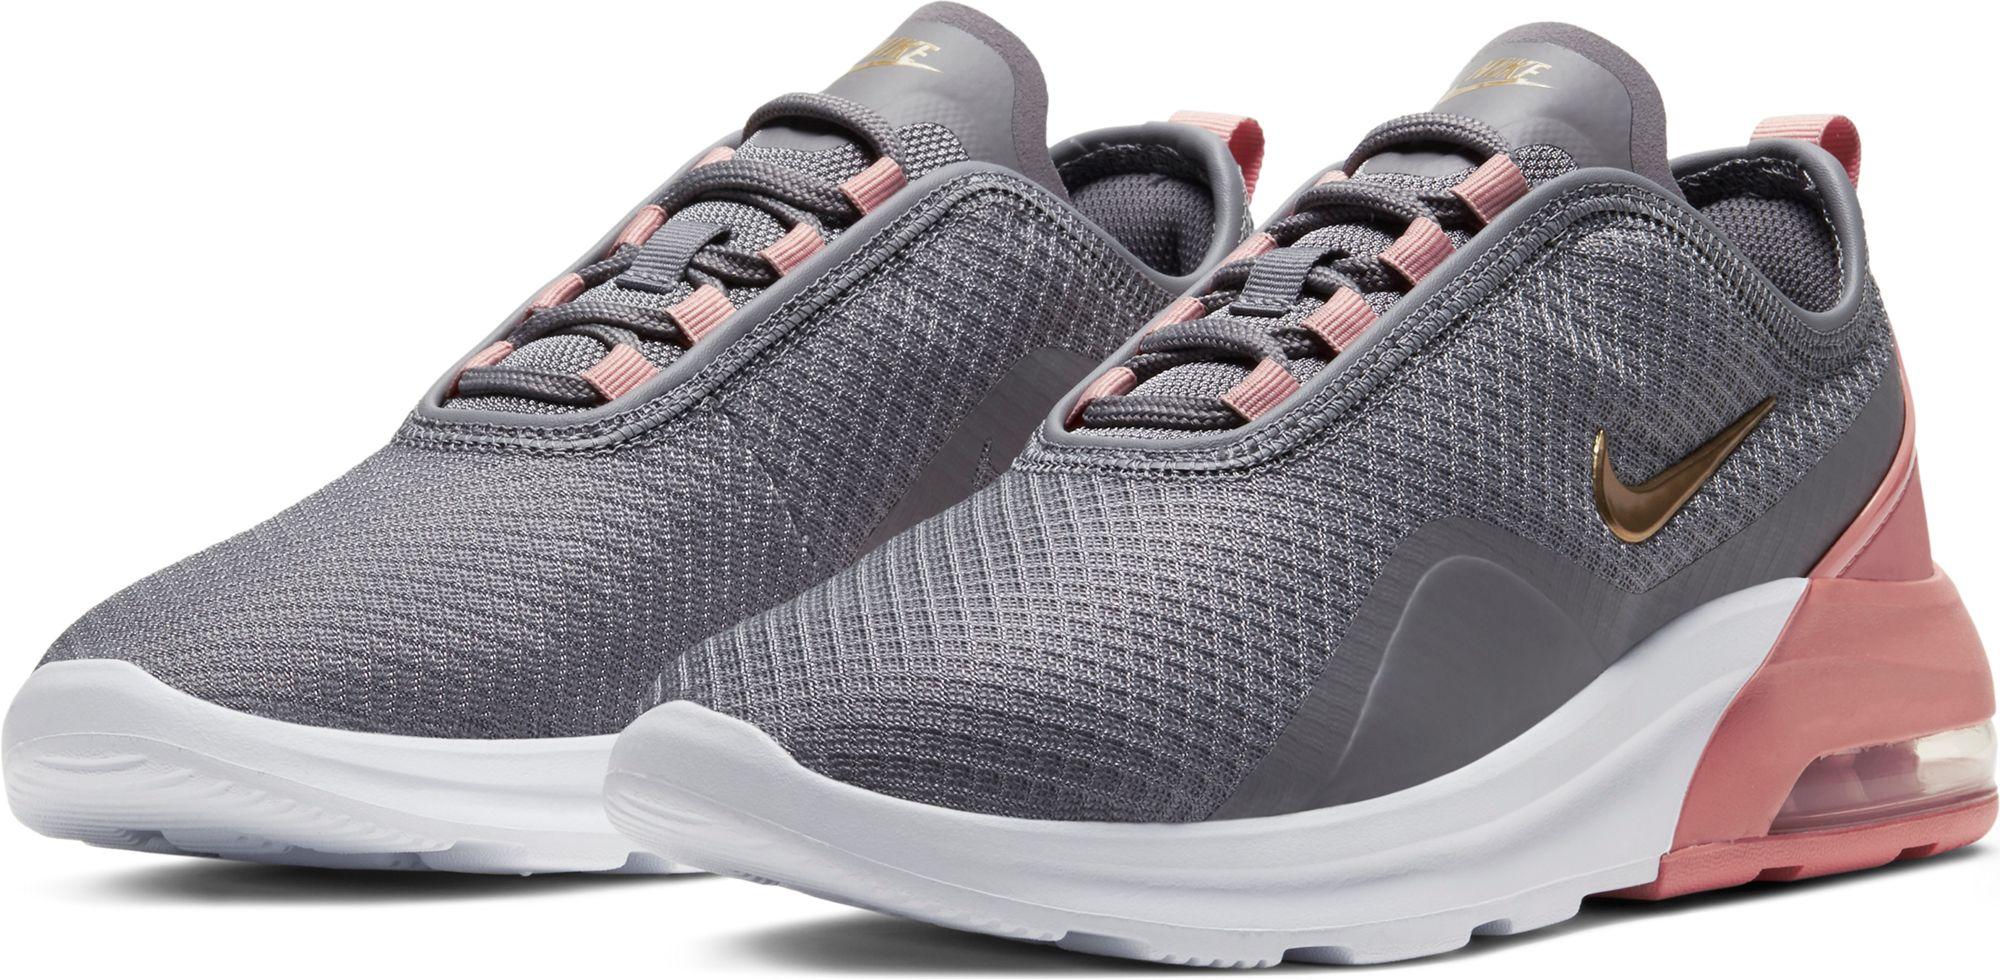 Nike Air Max Motion 2 Shoes in Grey 